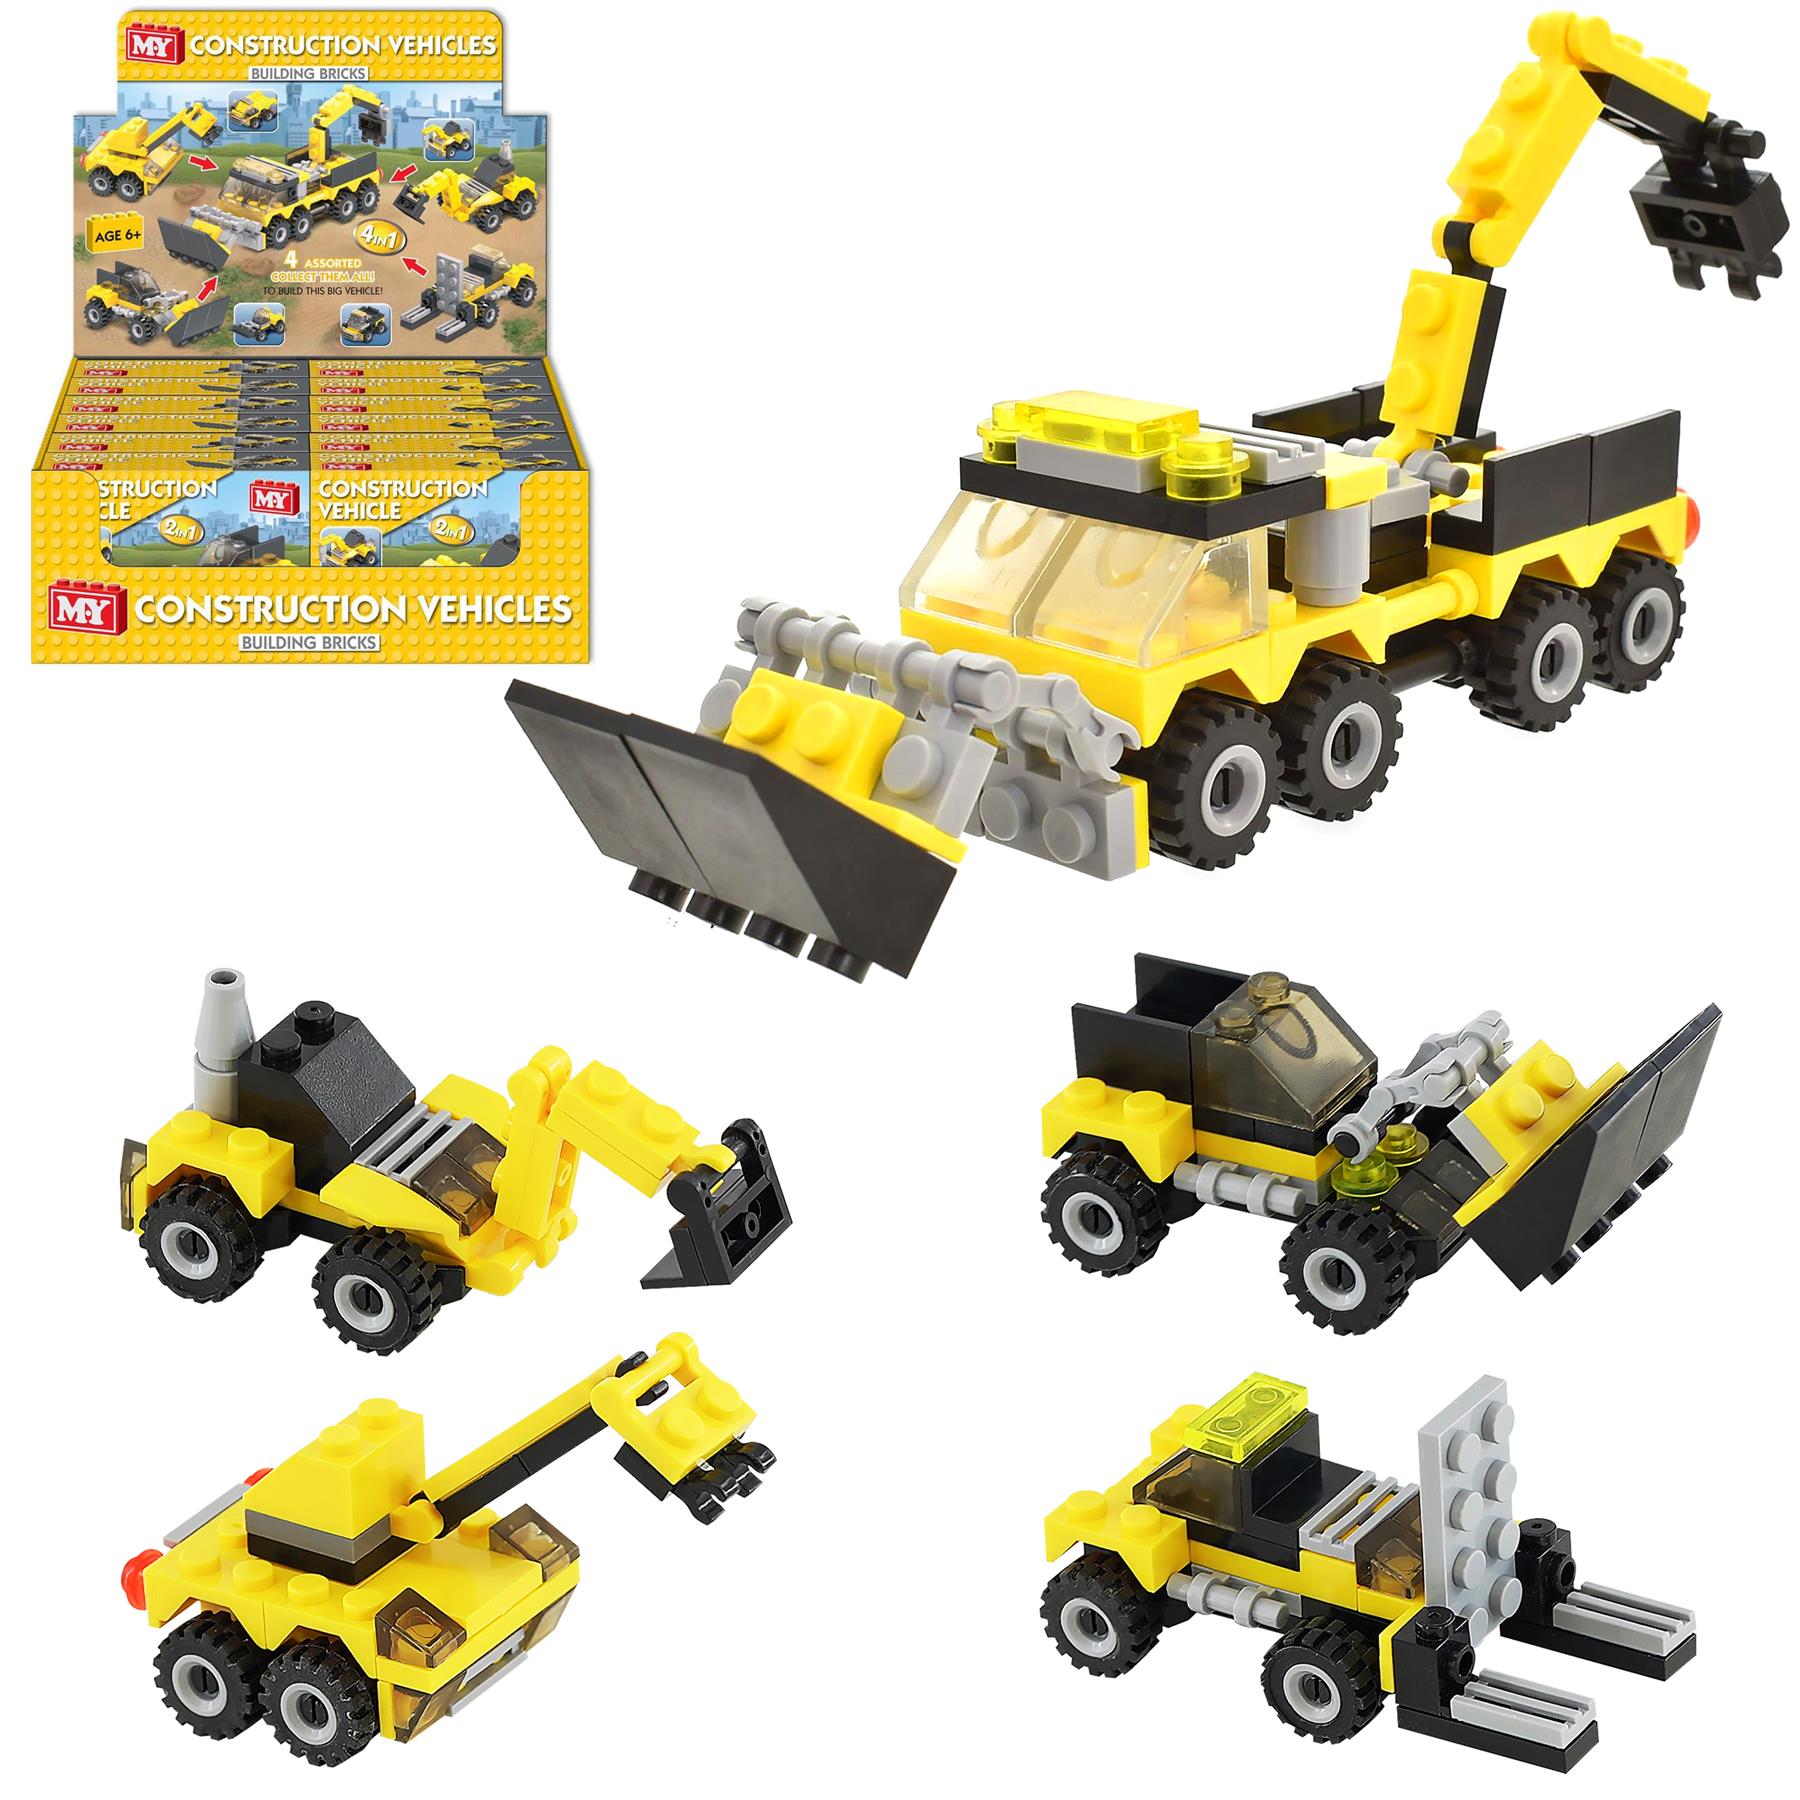 Construction Vehicles Building Bricks 2 in 1 by The Magic Toy Shop - UKBuyZone